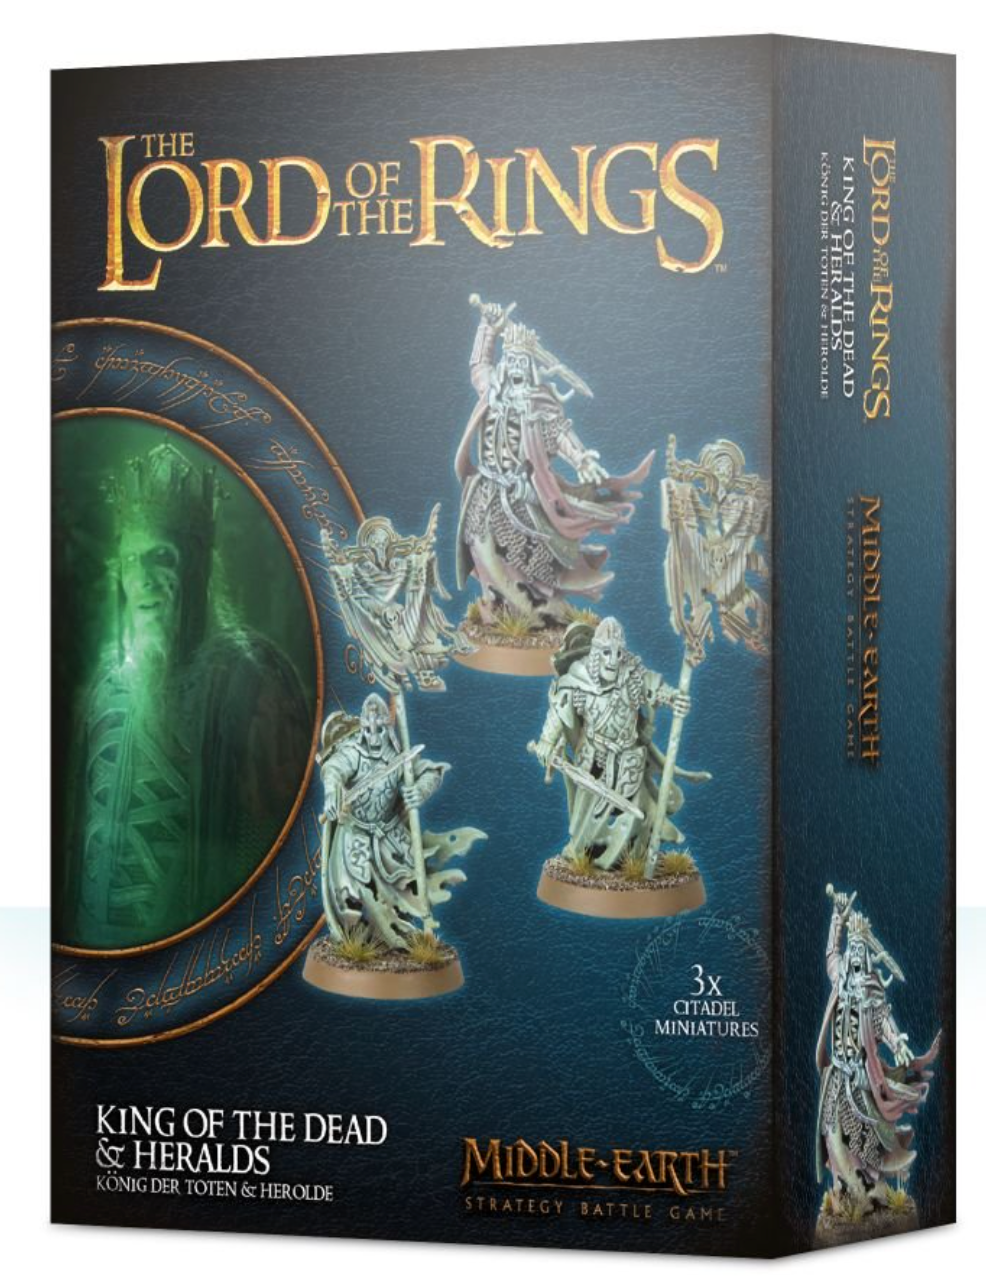 The Lord Of The Rings: King of the Dead & Heralds